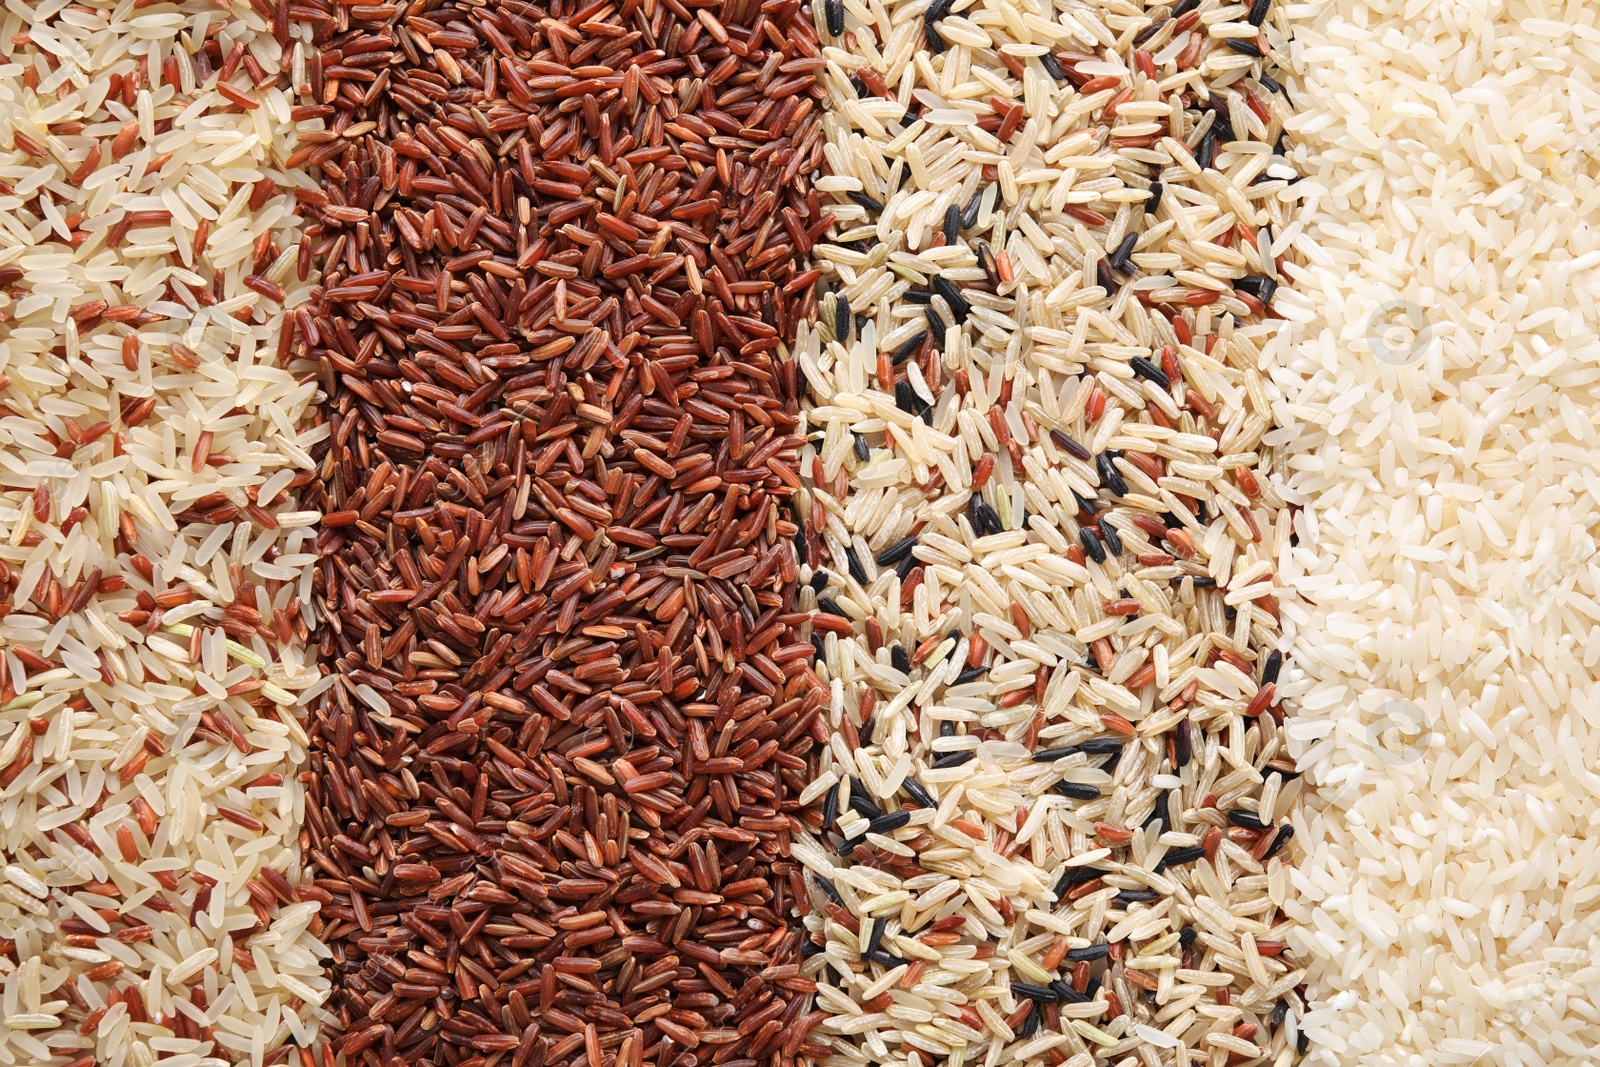 Photo of Different types of rice as background, top view